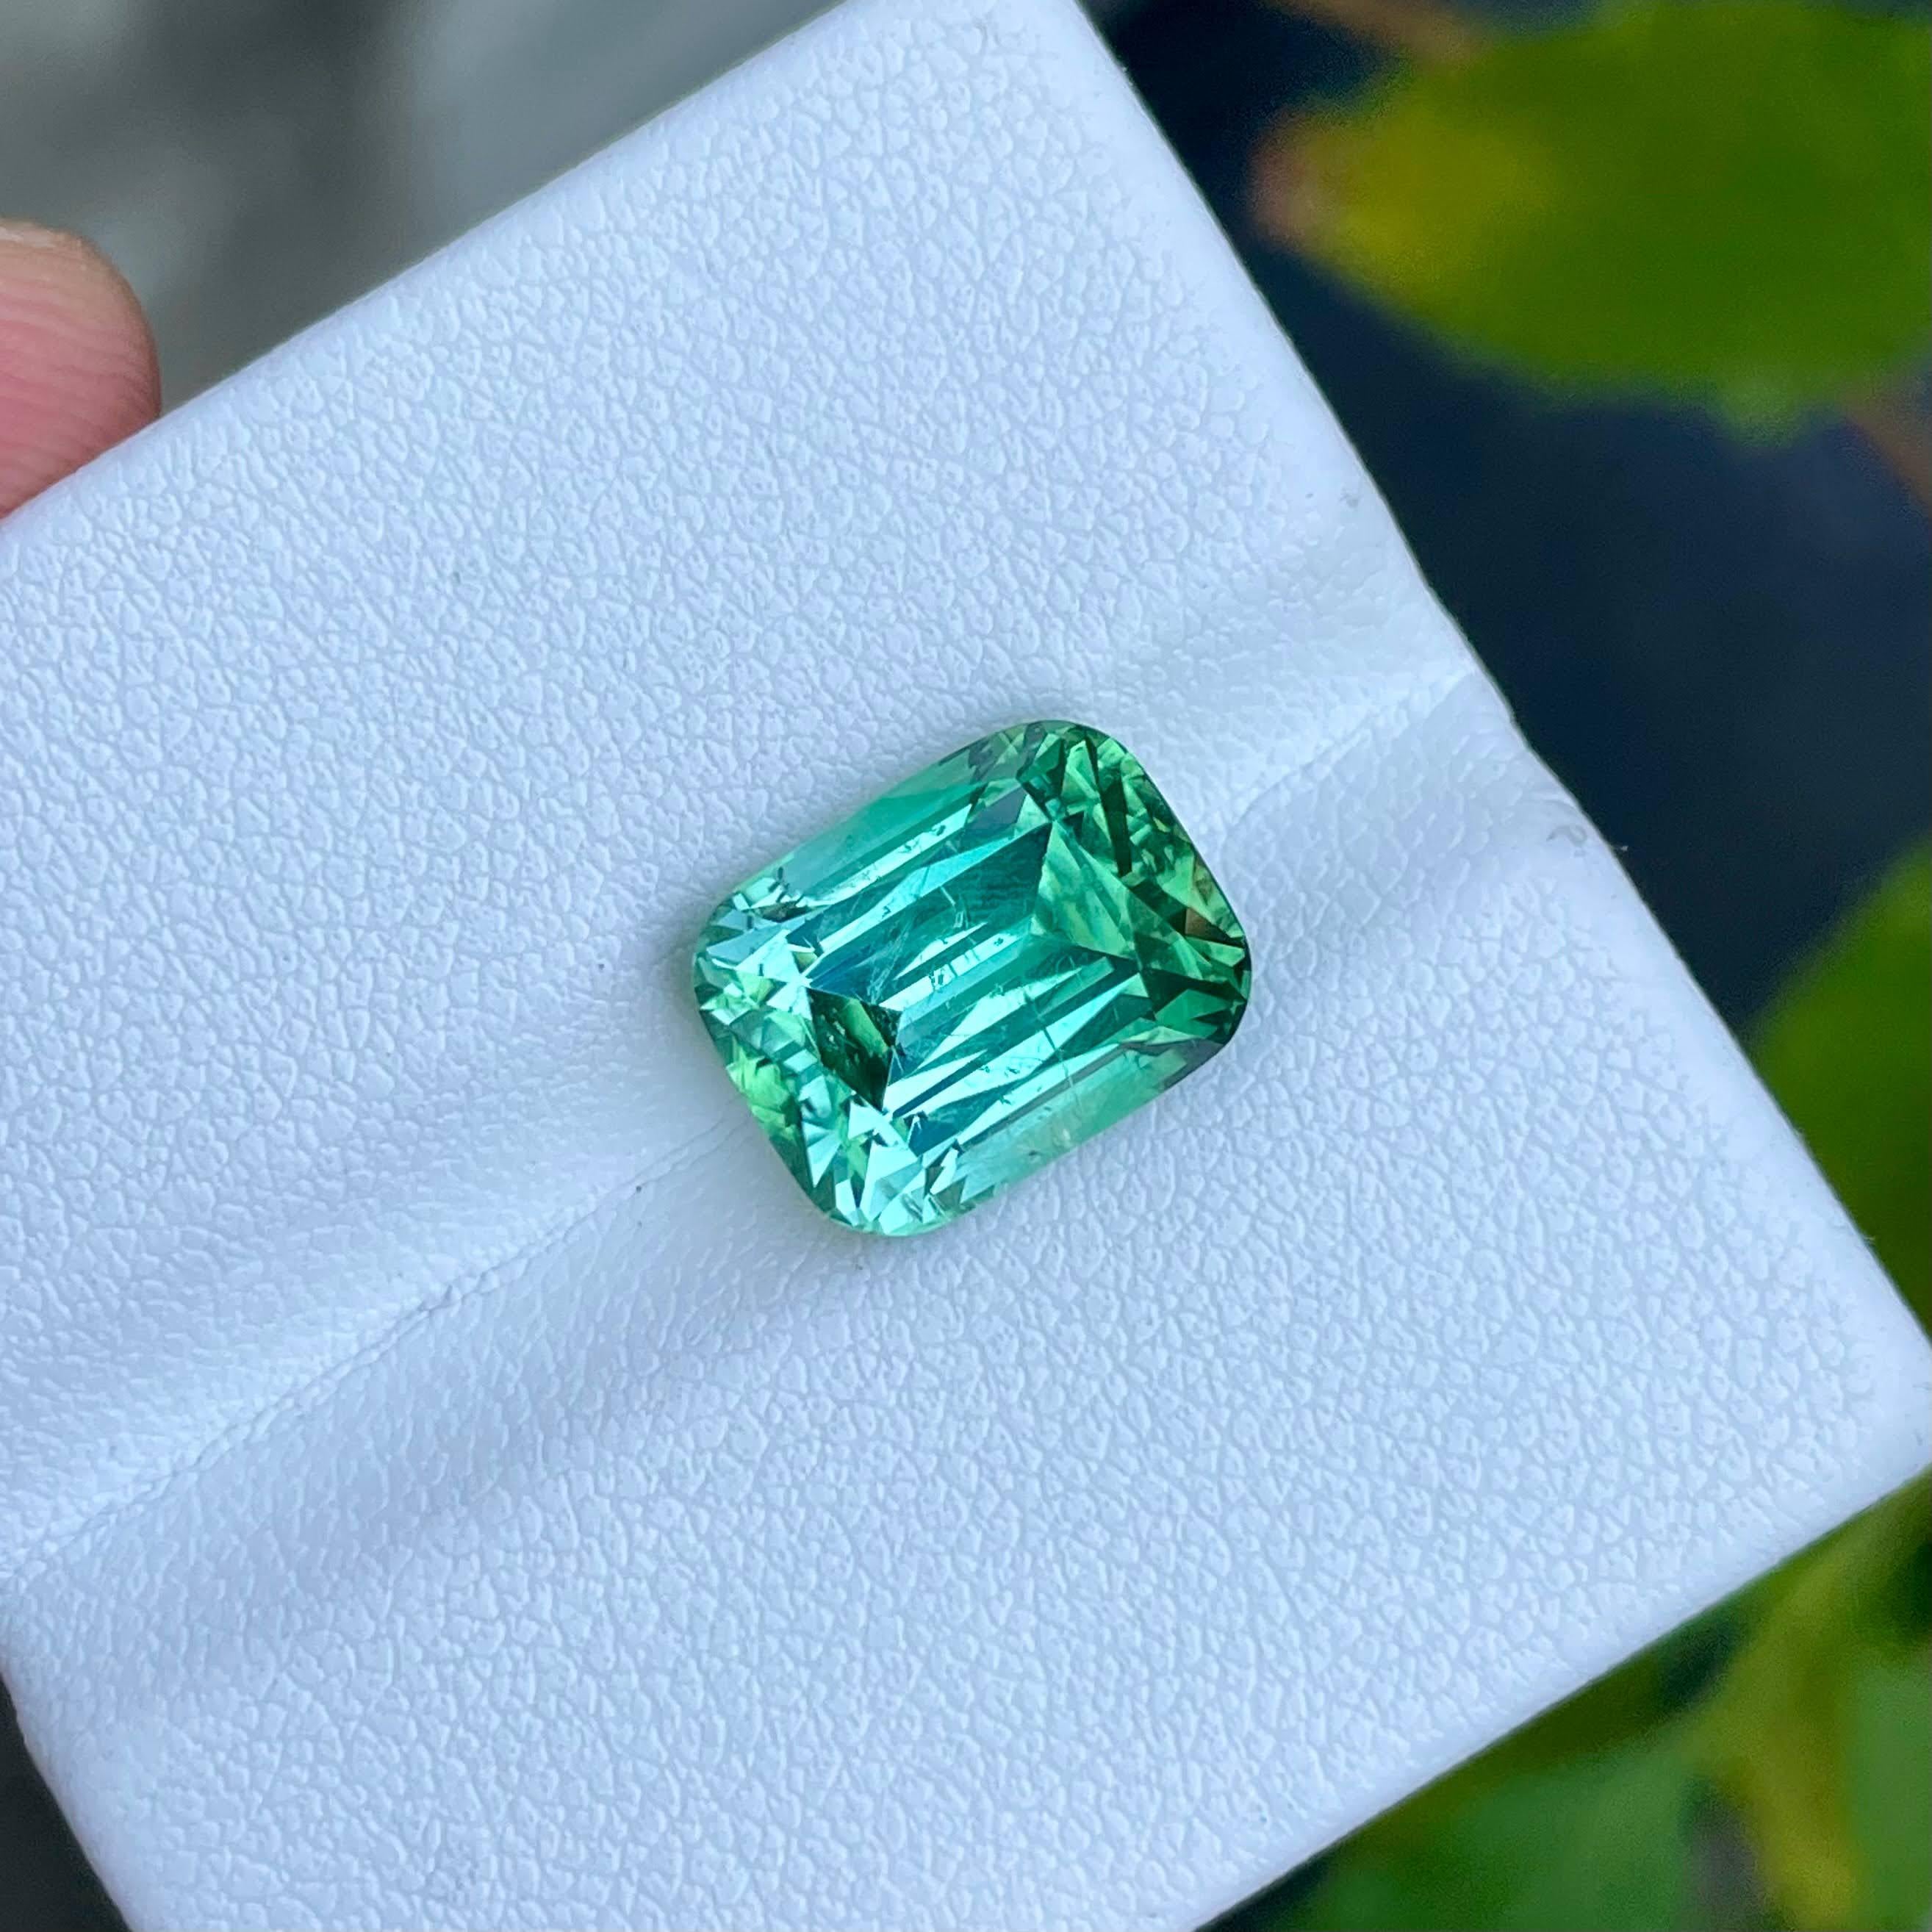 6.78 carats
11.6x9x8 mm
Clarity: SI
Origin: Afghanistan
Treatment : None
Shape: Cushion
Cut: Step Cushion




The 6.78 carats Mint Green Tourmaline is an exquisite natural gemstone sourced from Afghanistan, renowned for producing some of the world's